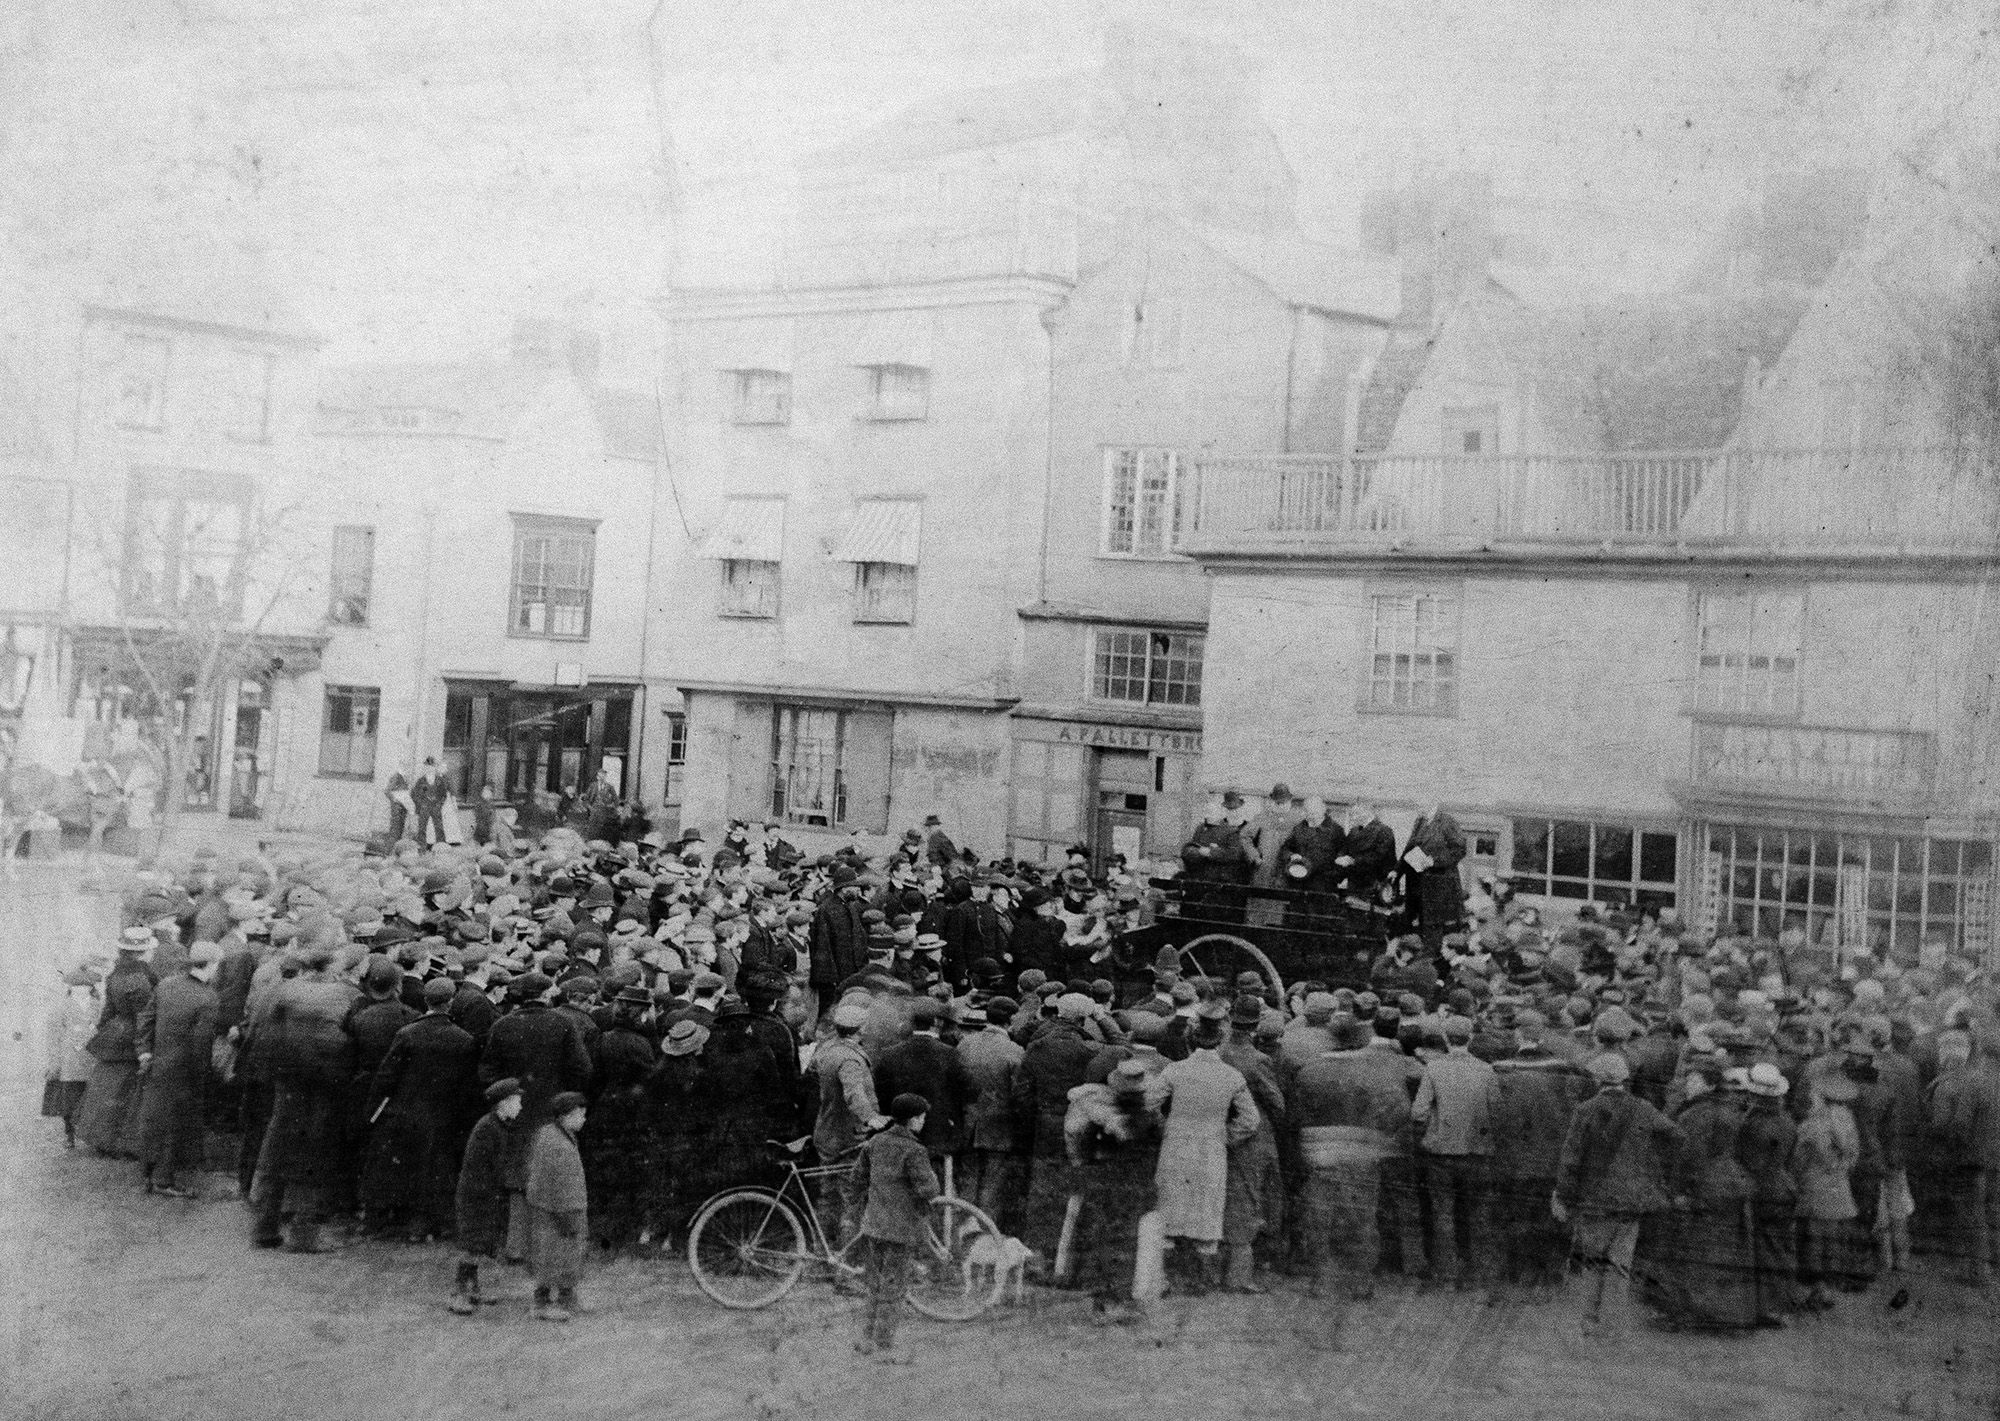 The proclamation of King Edward VII. Market Square, 26th January 1901.